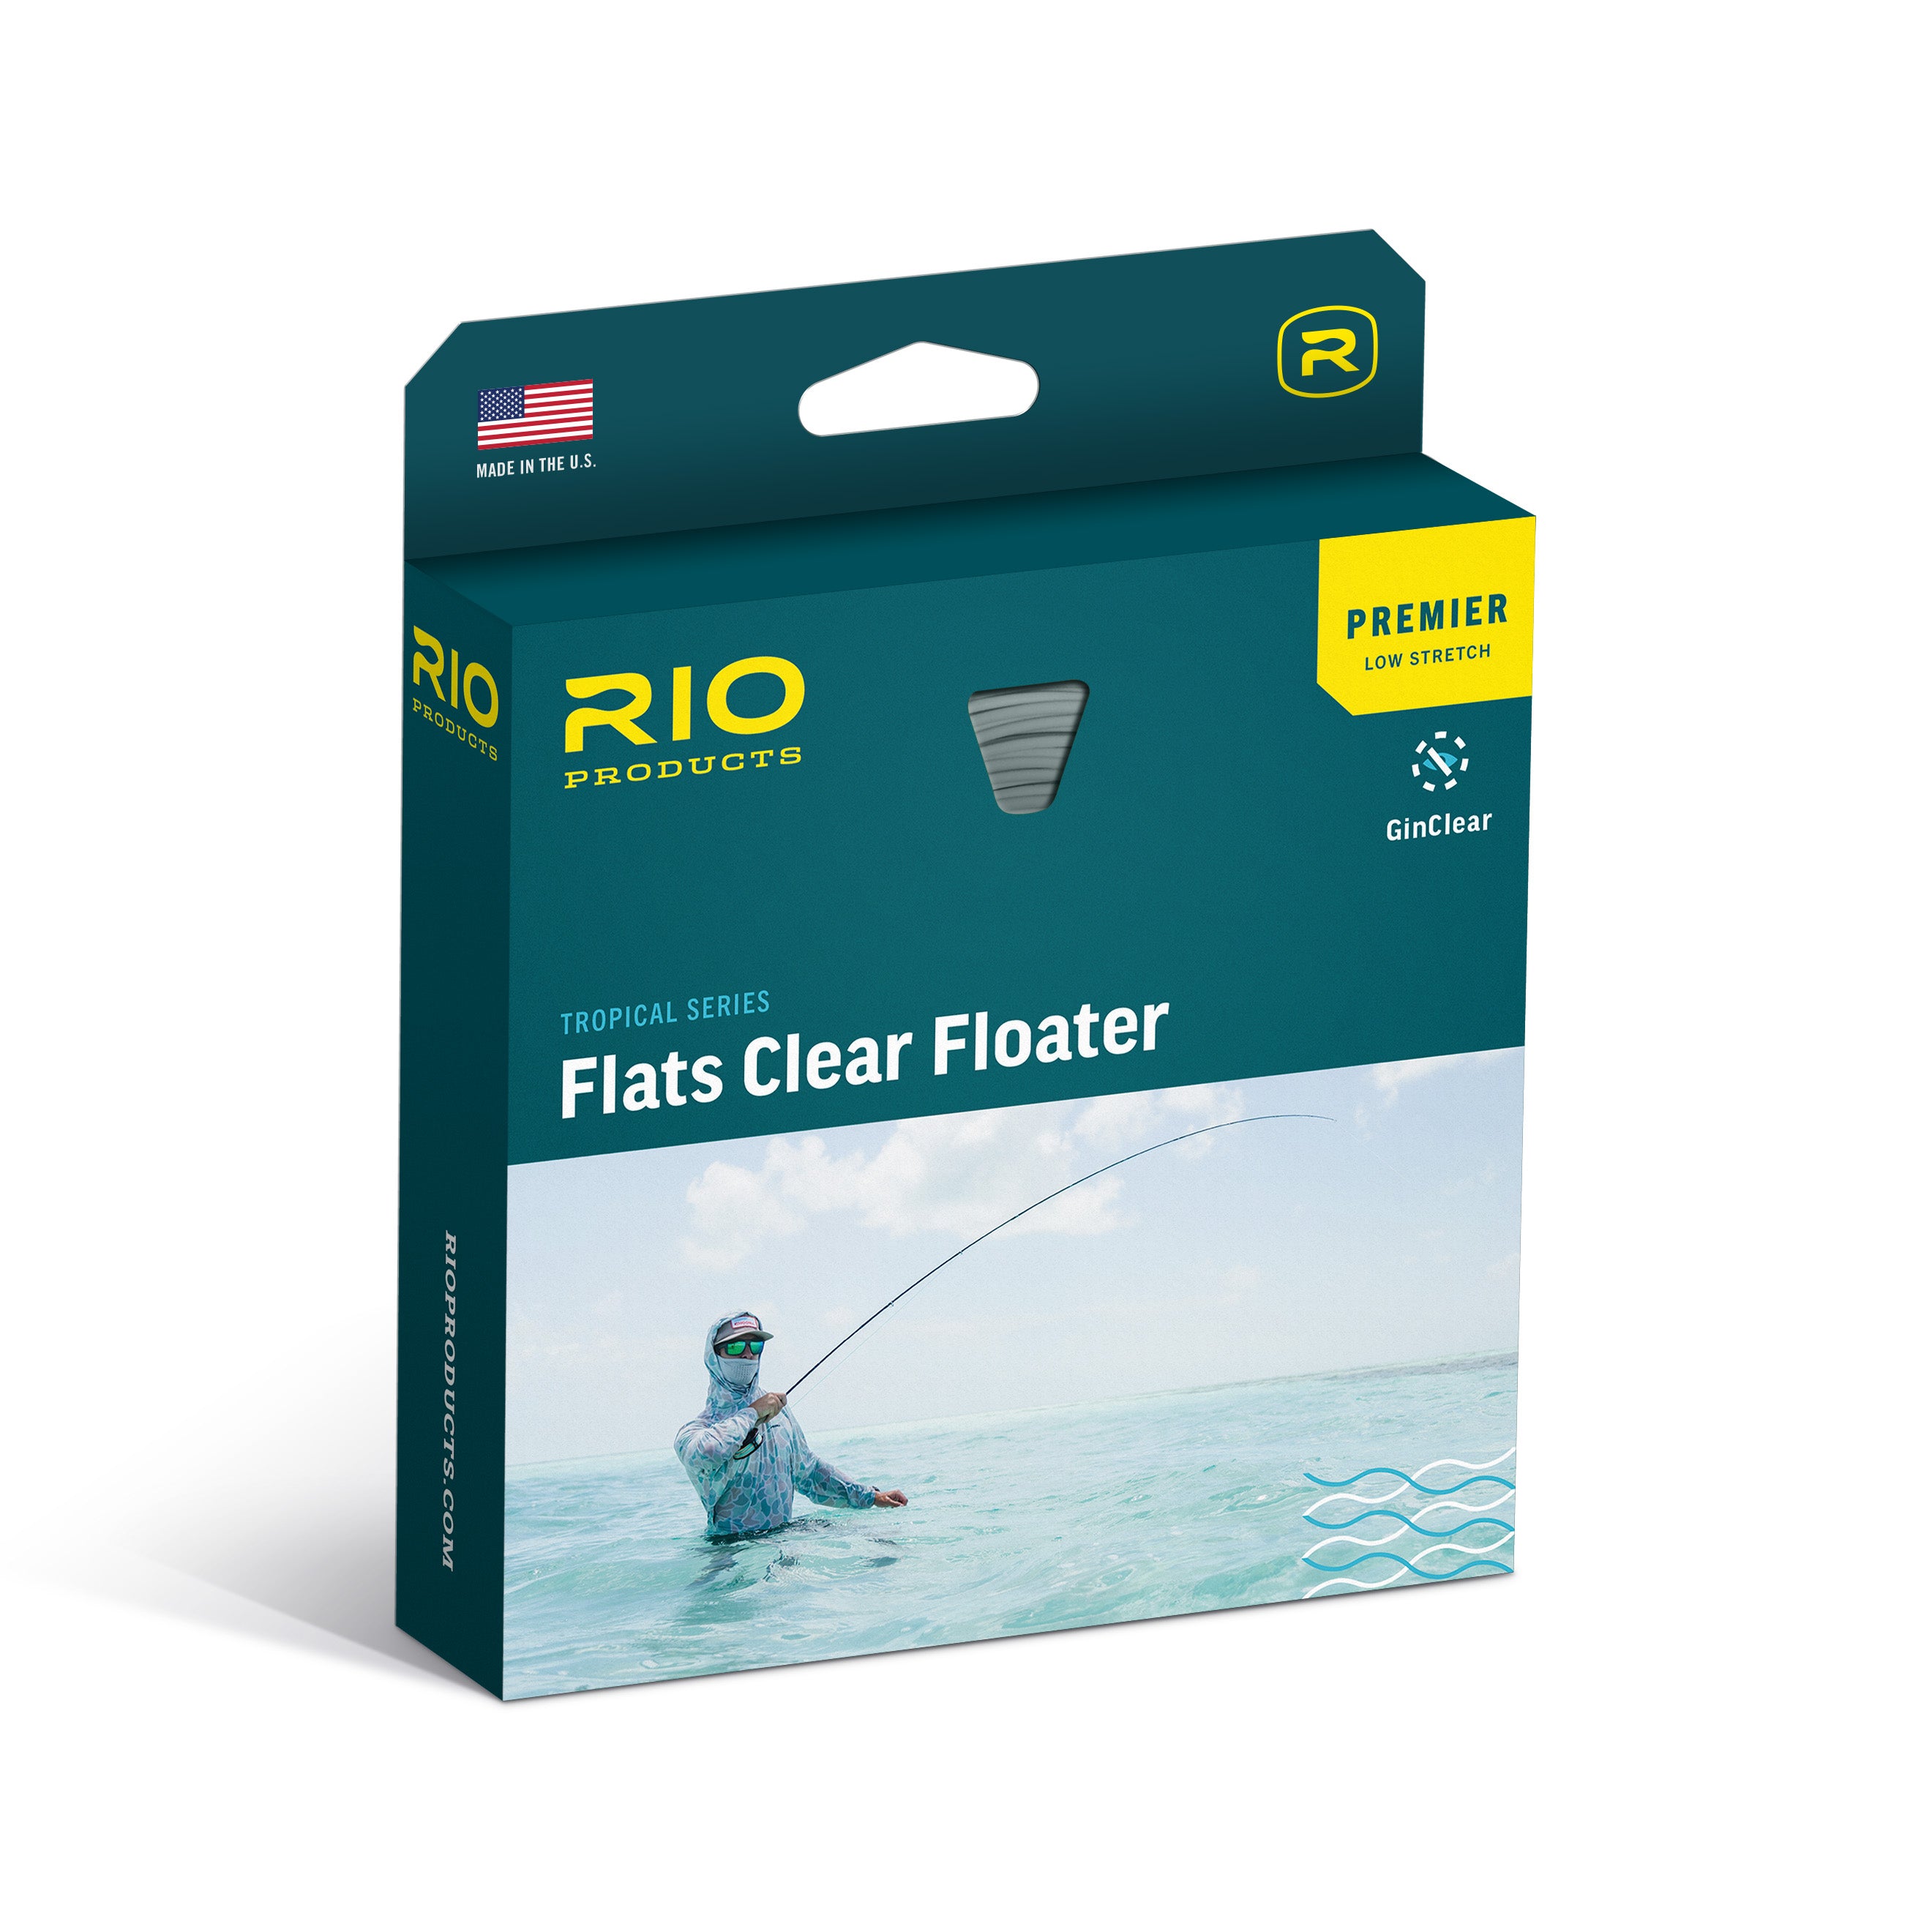 RIO Elite Flats Pro Fly Line 15' Clear Tip